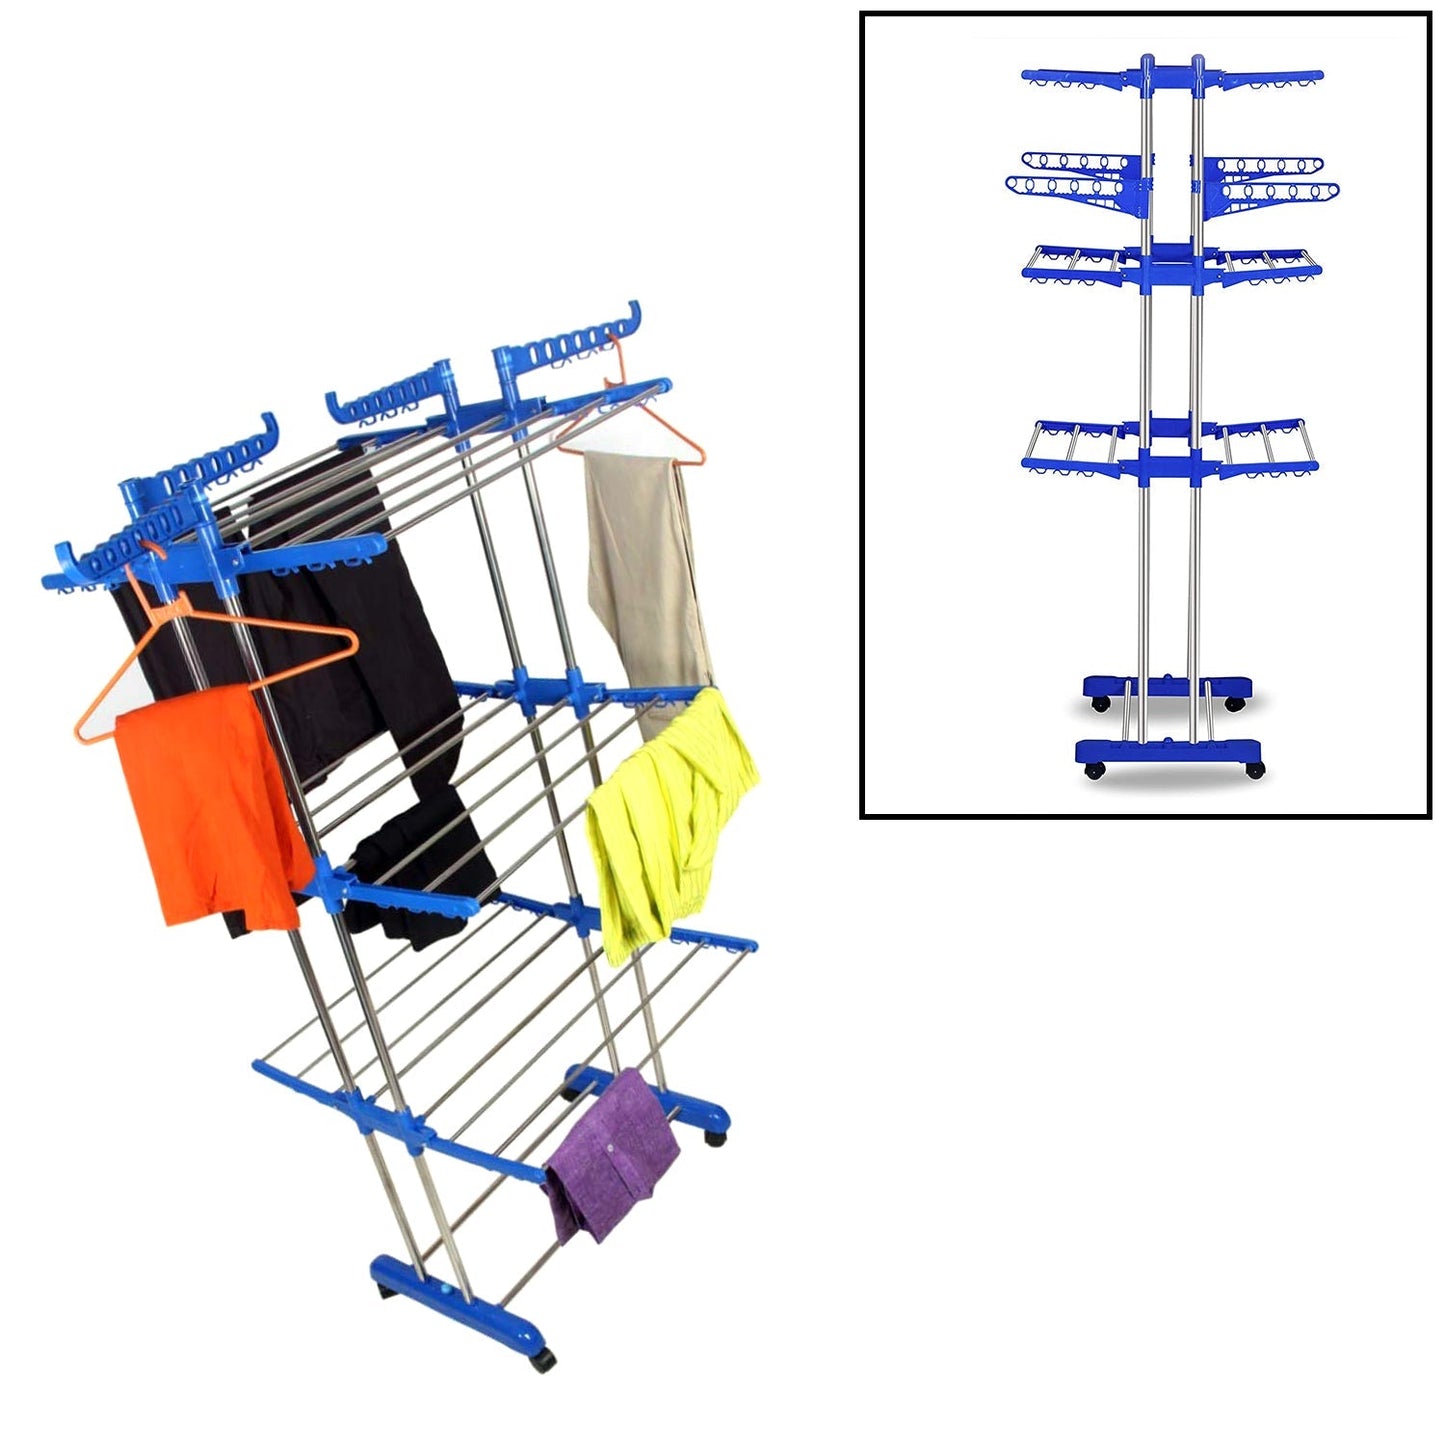 0733B Folding Double Supported 3 Layer Cloth Drying Stand Laundry Dryer Hanger with Breaking Wheels for Balcony Indoor and Outdoor Home, Steel